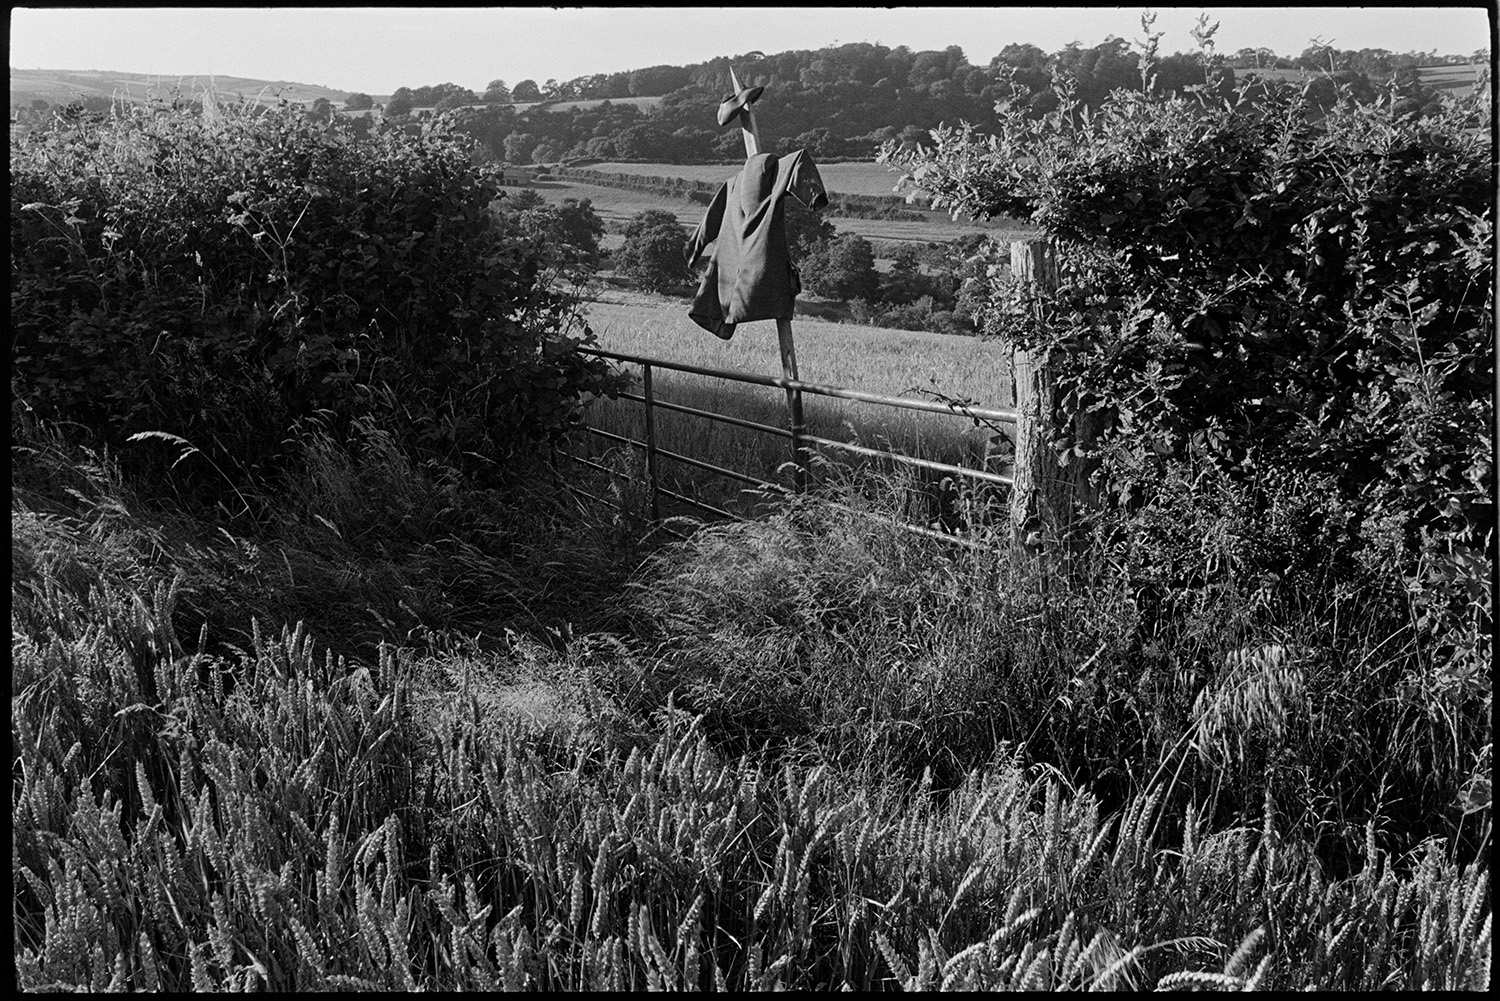 Scarecrow on gate between cornfields.
[A scarecrow tied to a metal field gate between two corn fields at Rashleigh Barton, Chulmleigh.]